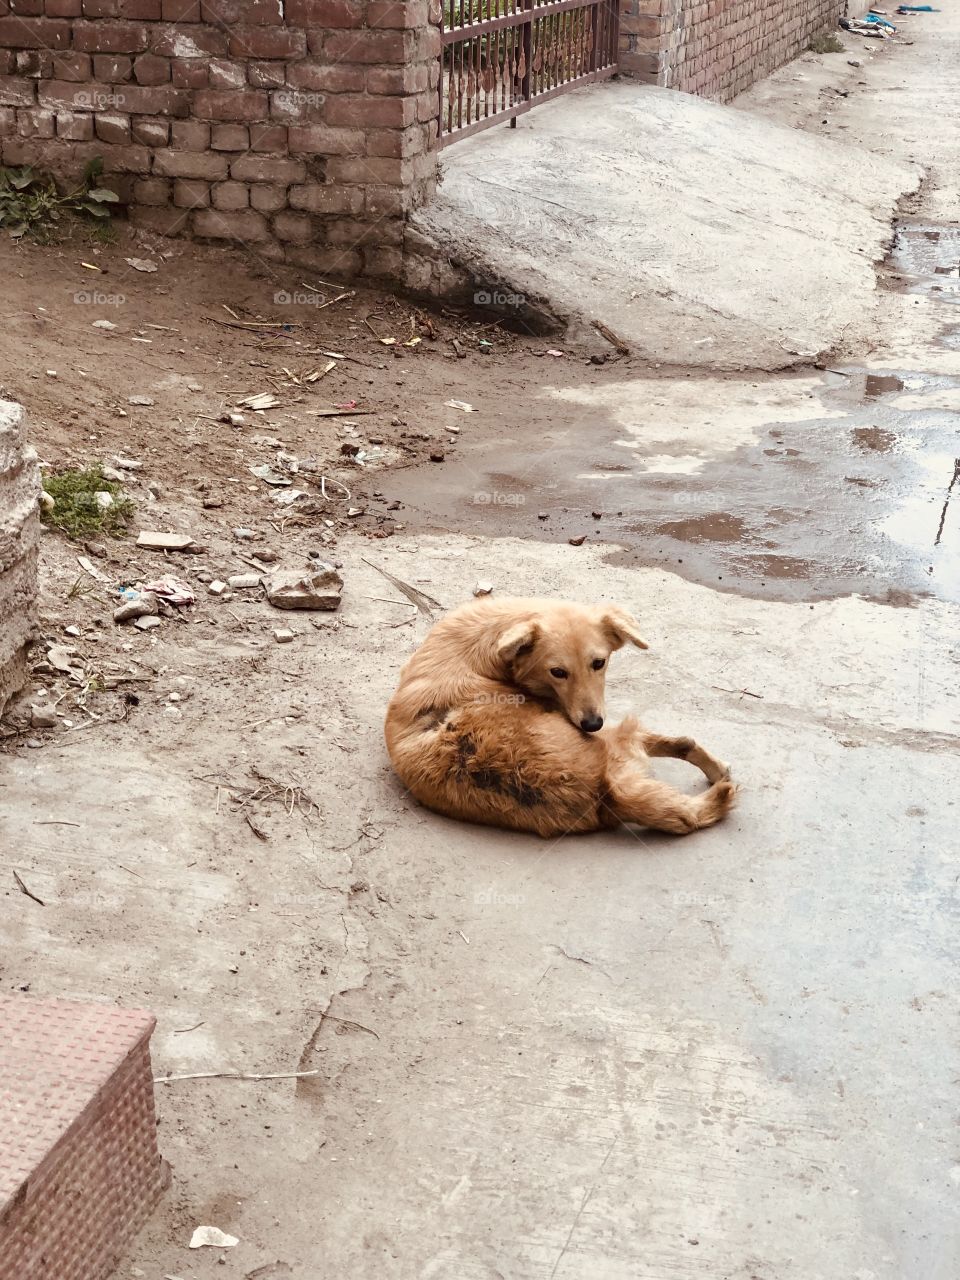 Dog in the streets of india